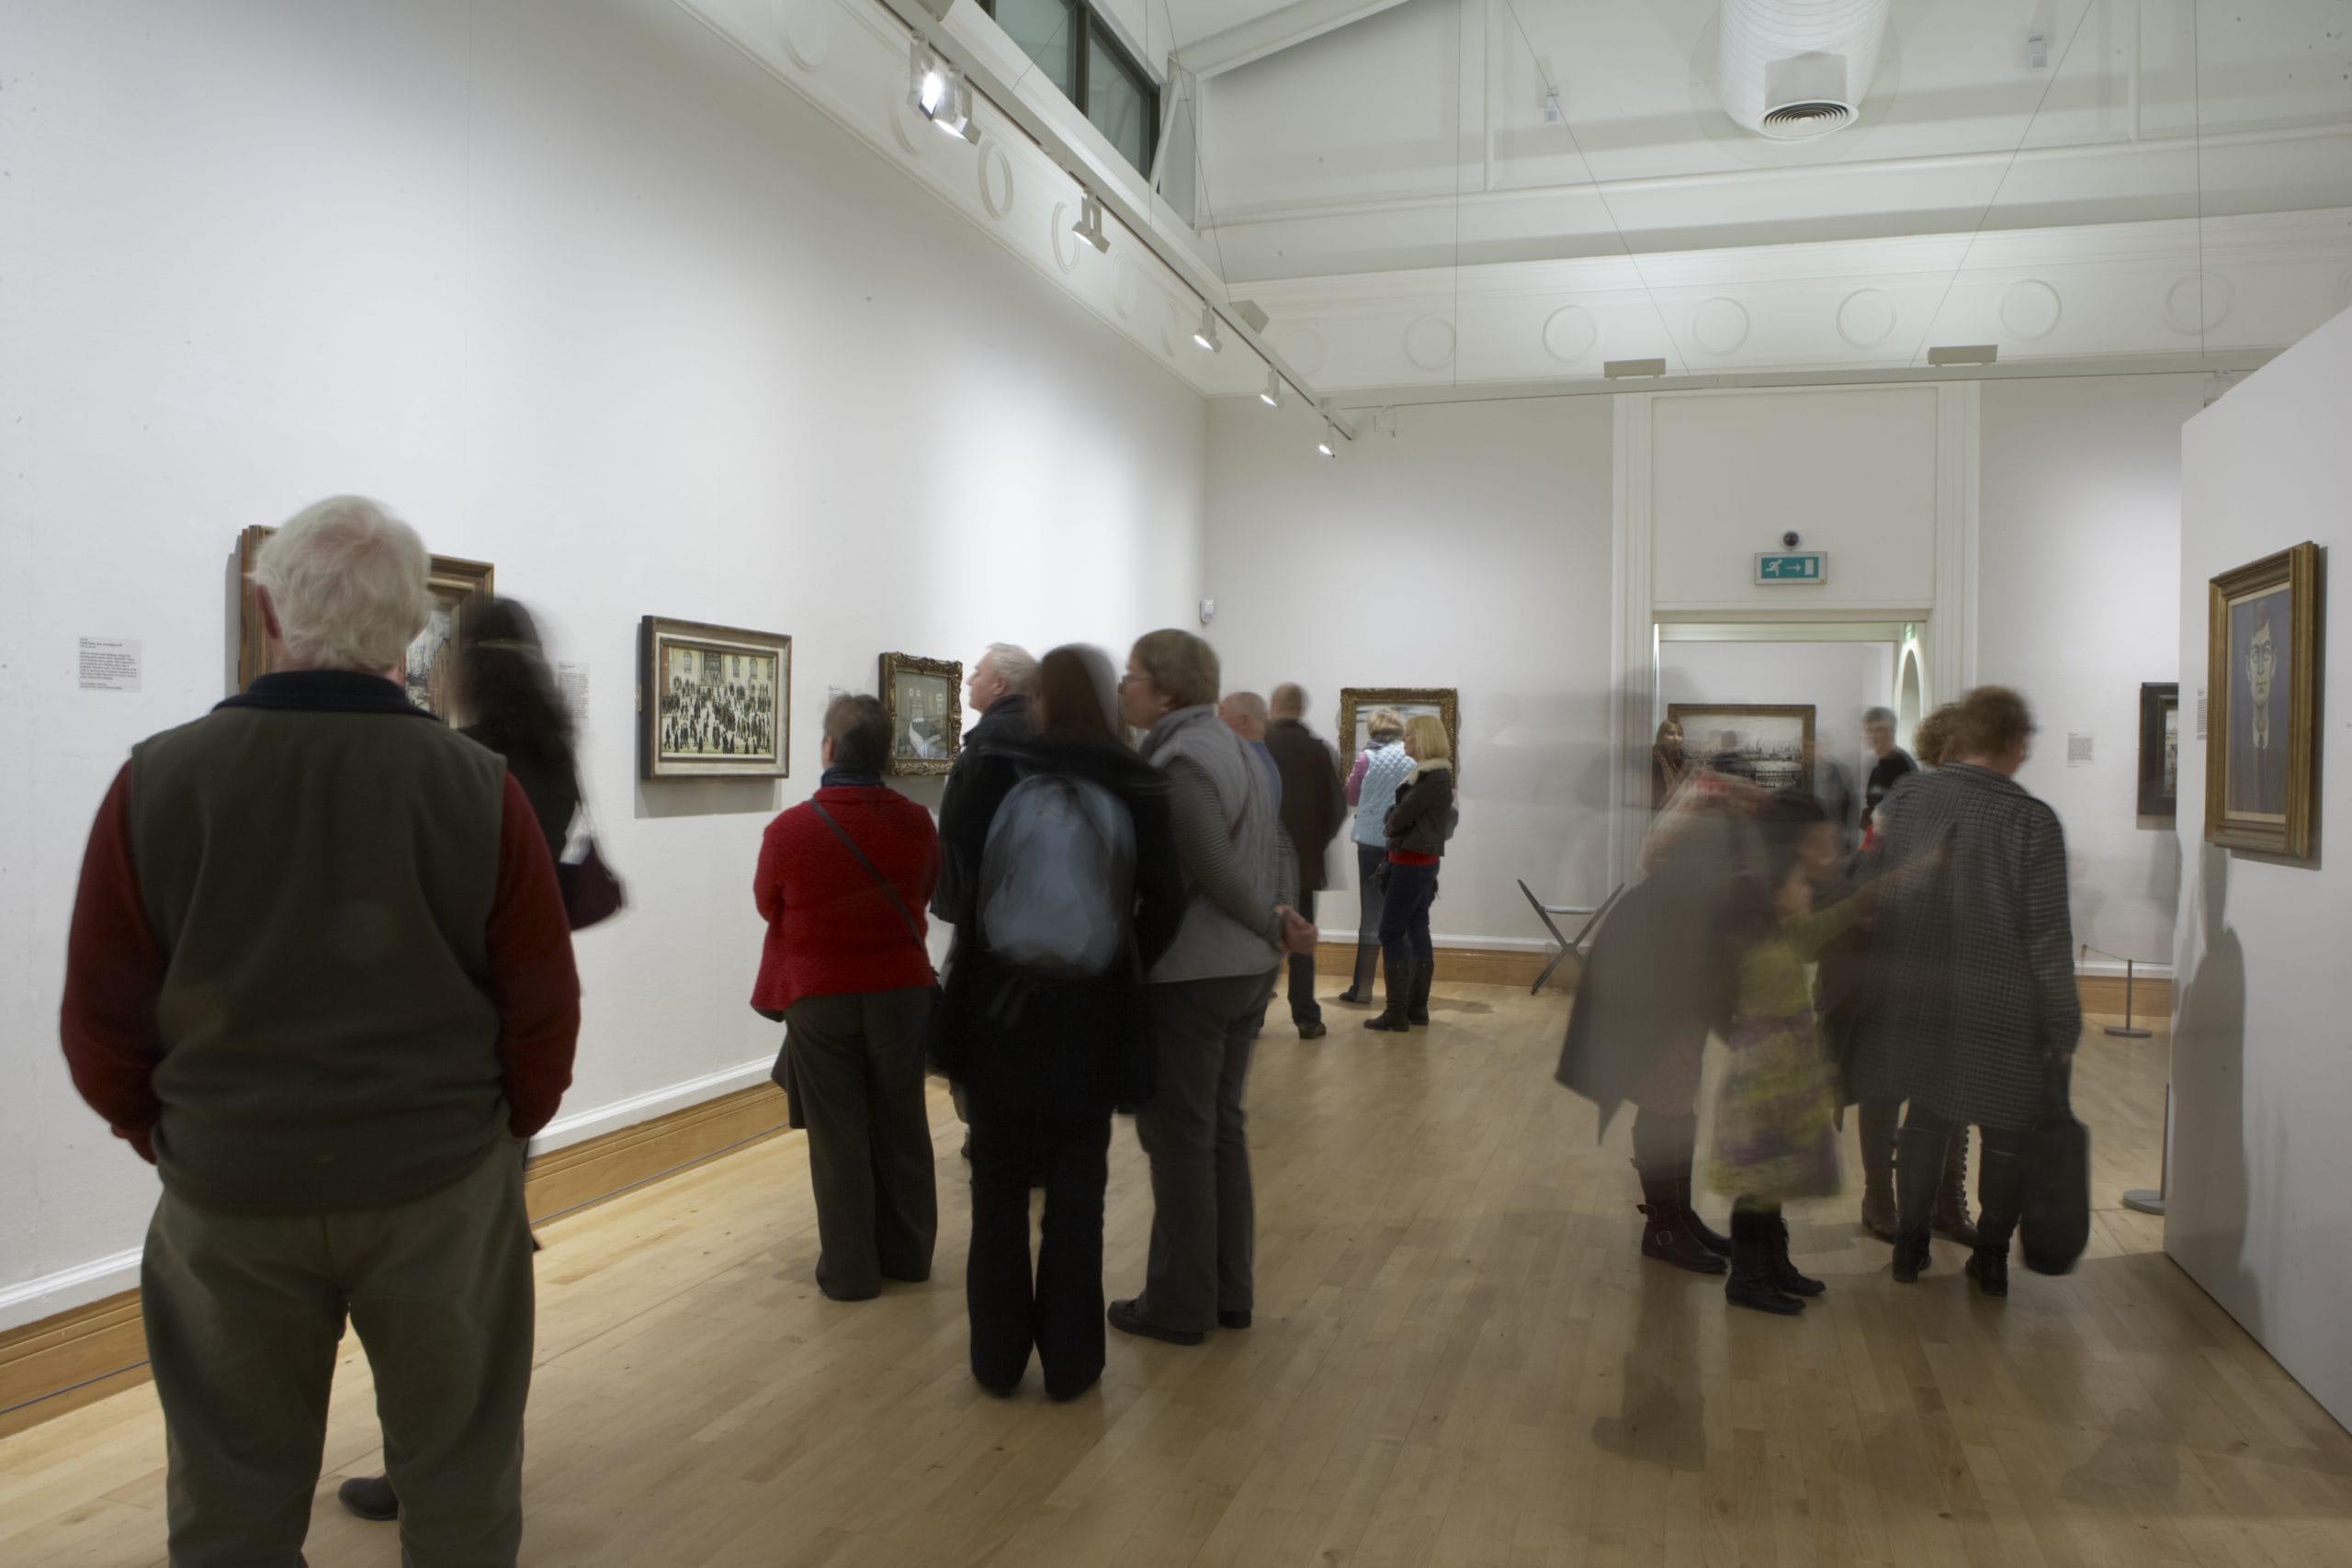 A group of people look at Lowry Paintings in the Djanogly Gallery